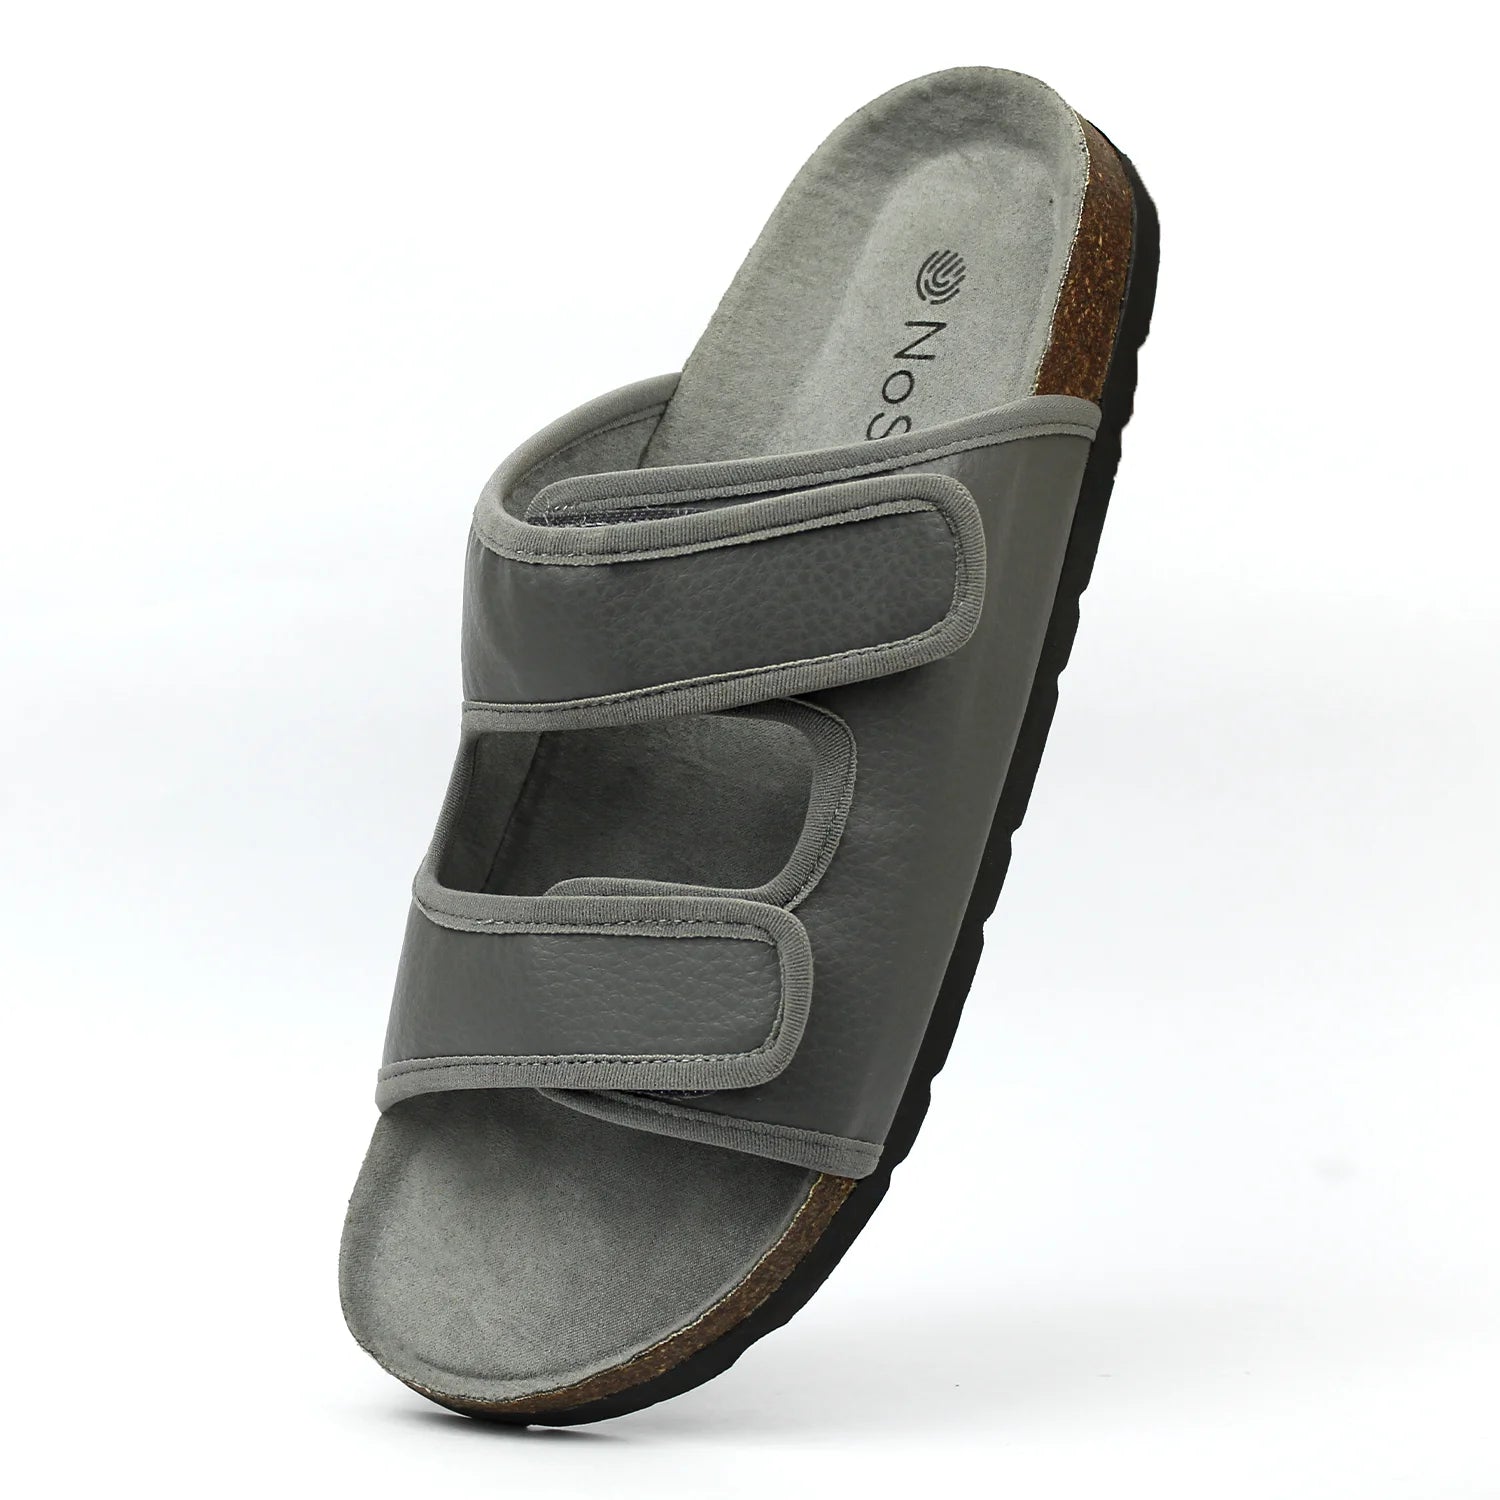 Cloudy Grey with these men's cork sandals, offering supreme comfort and a touch of sophistication